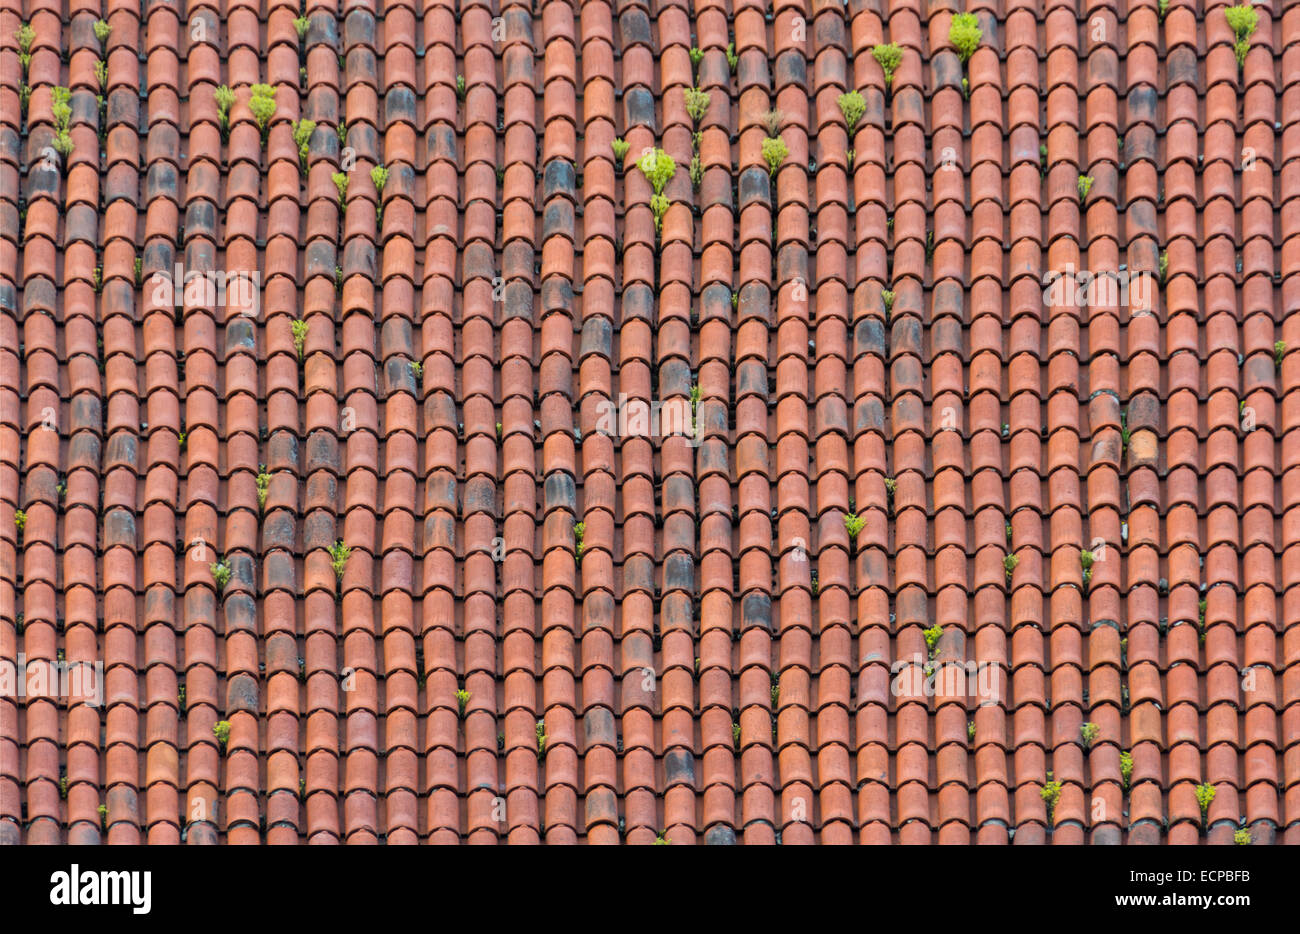 Homogeneous surface of red weathered roof tiles with light vegetation. Stock Photo